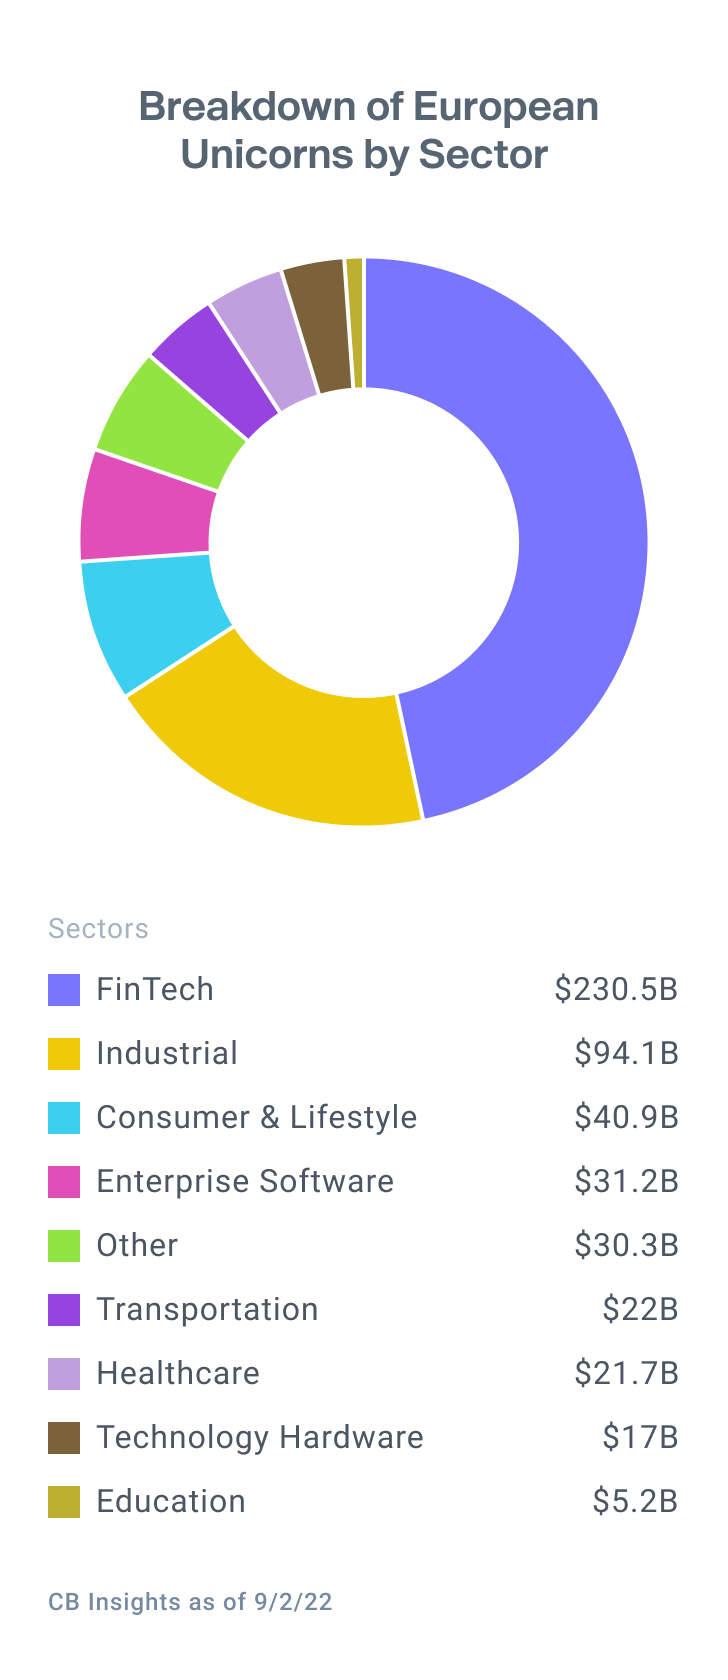 Pie chart shows that Fintech is the most represented European sector with $230.5B